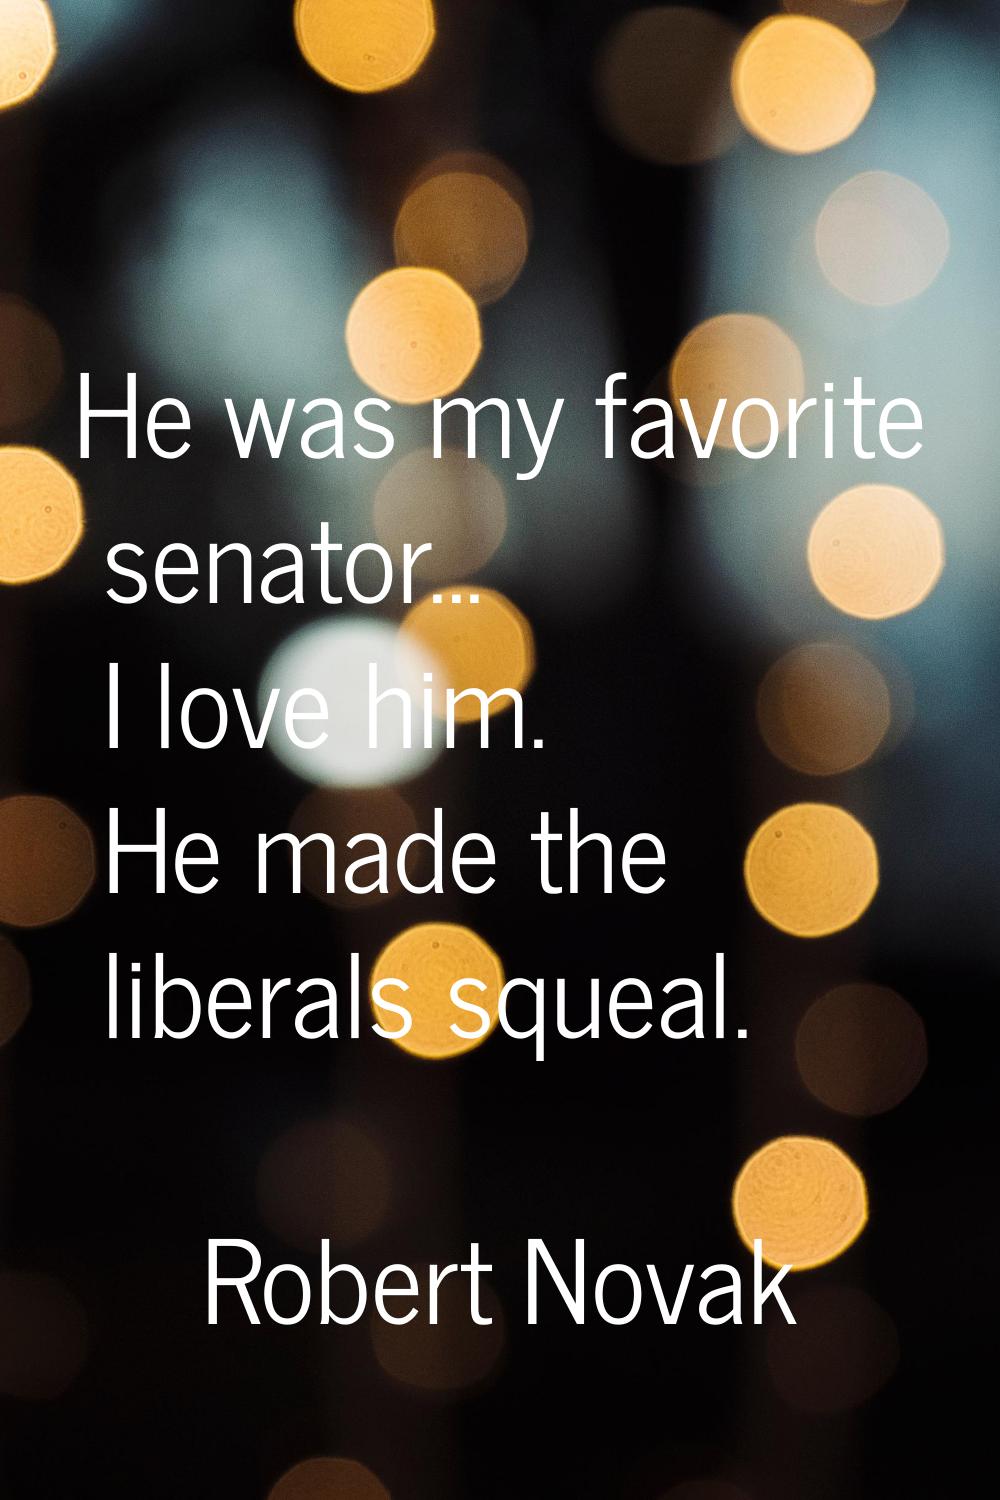 He was my favorite senator... I love him. He made the liberals squeal.